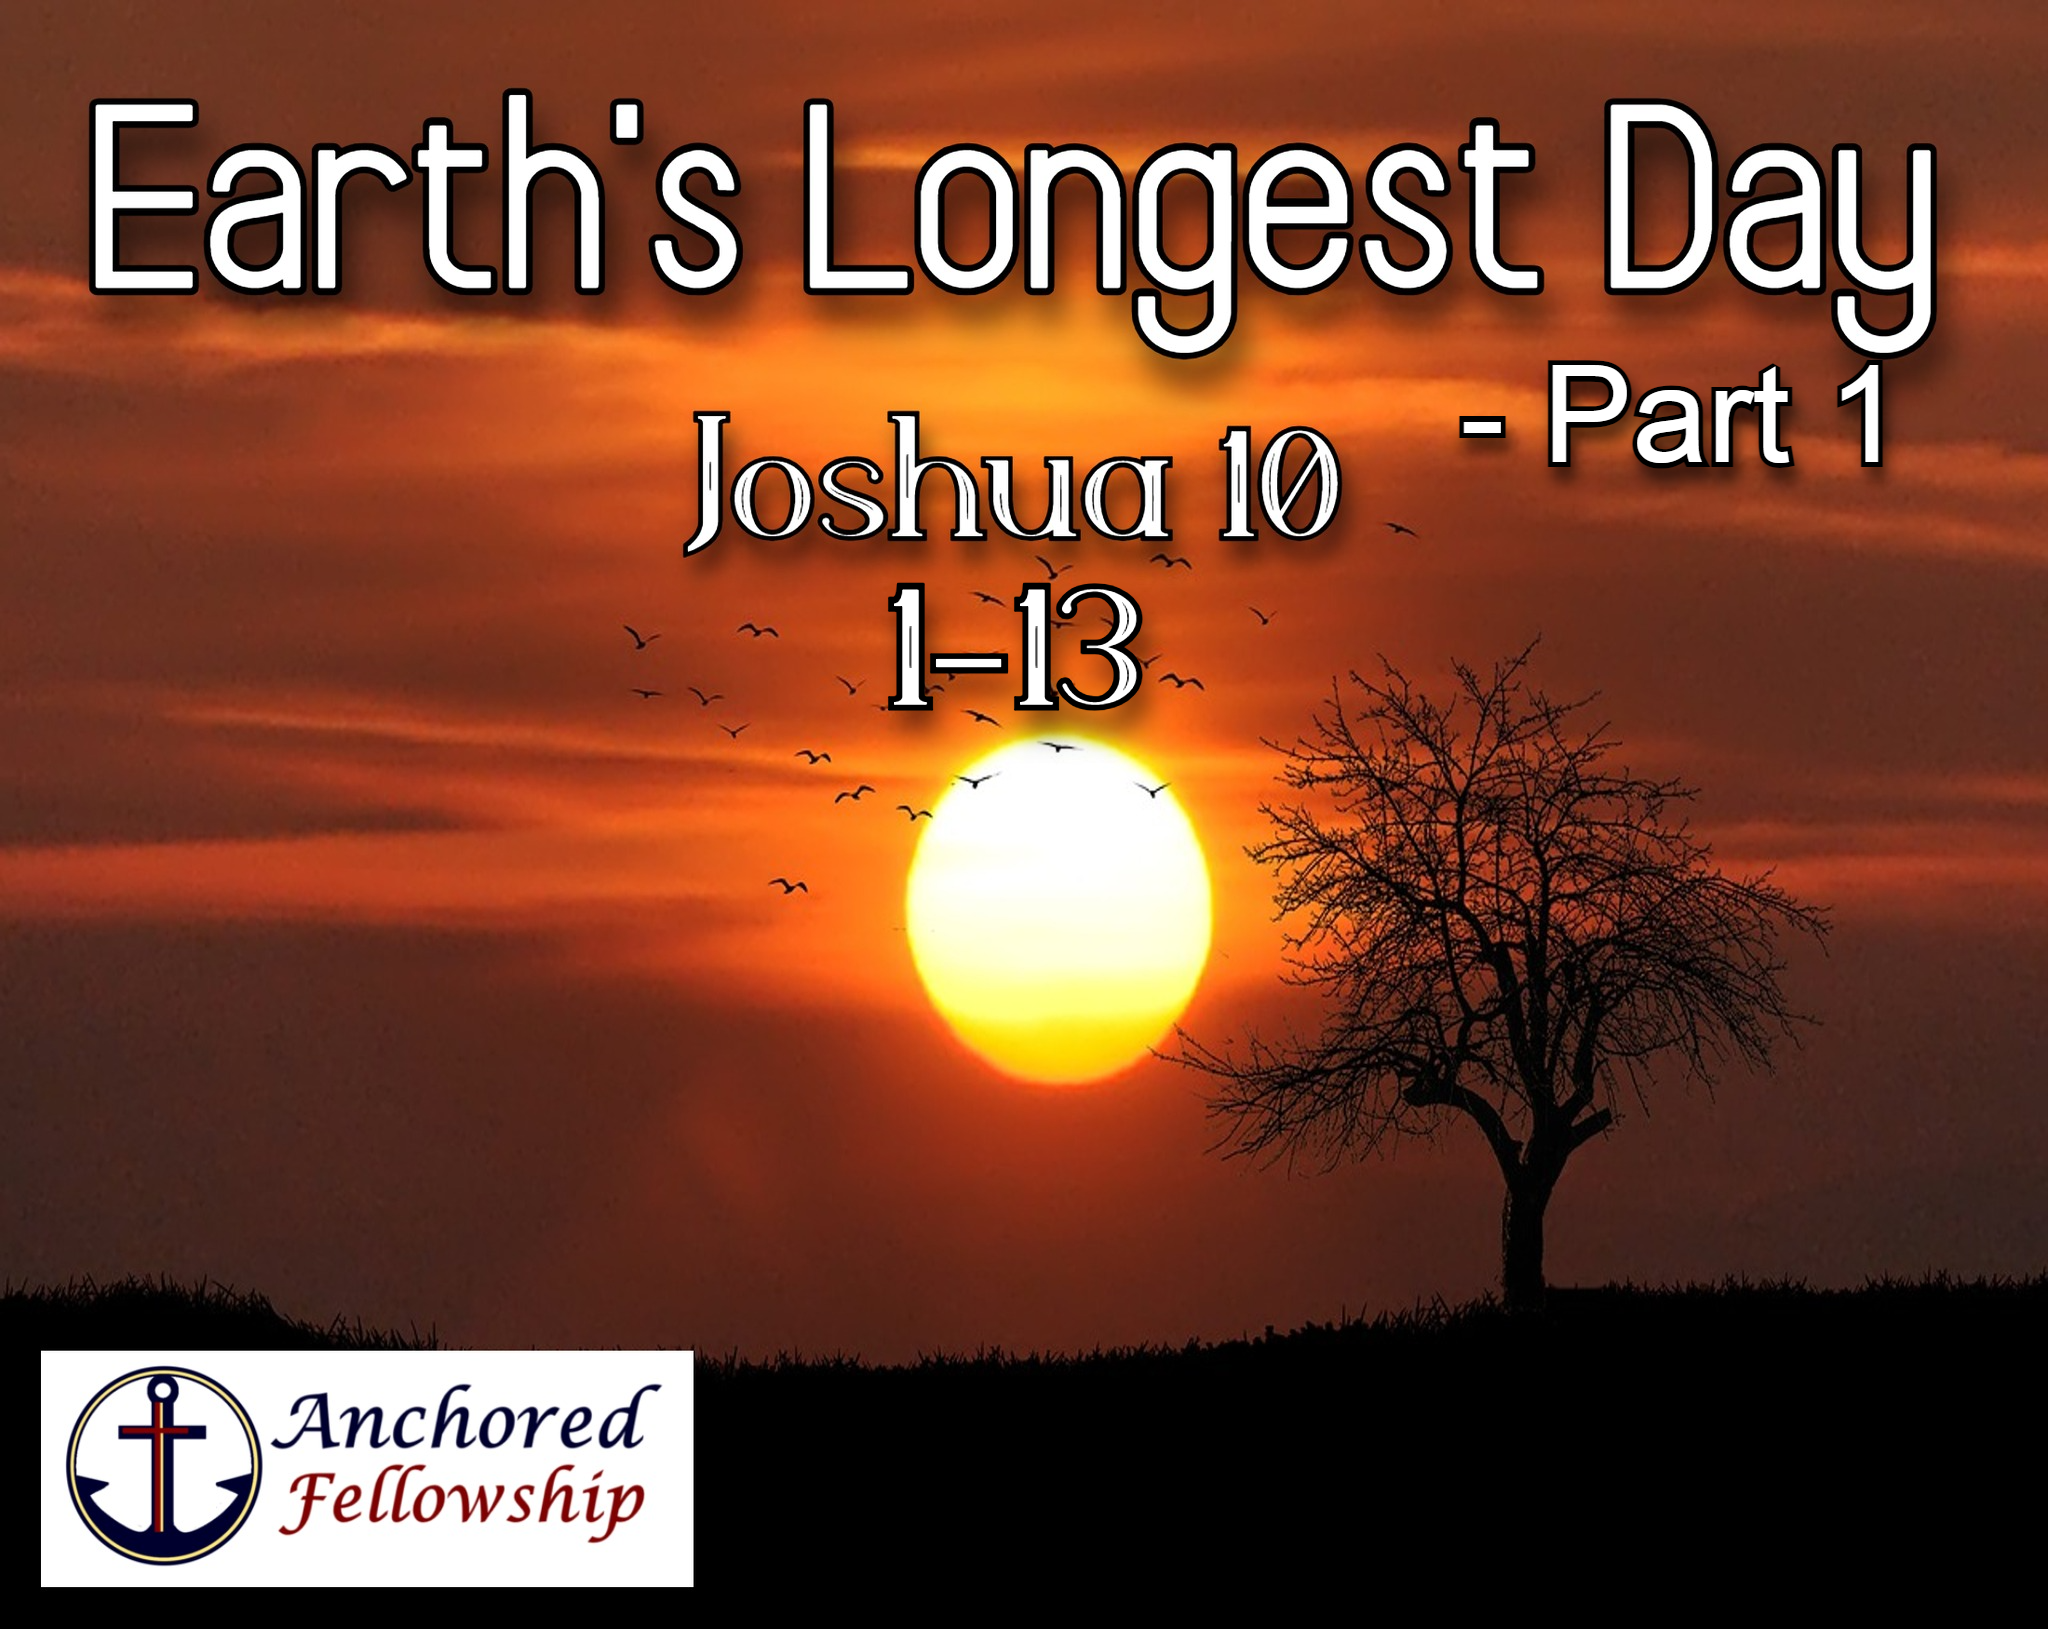 Earth's Longest Day - Part 1 Image